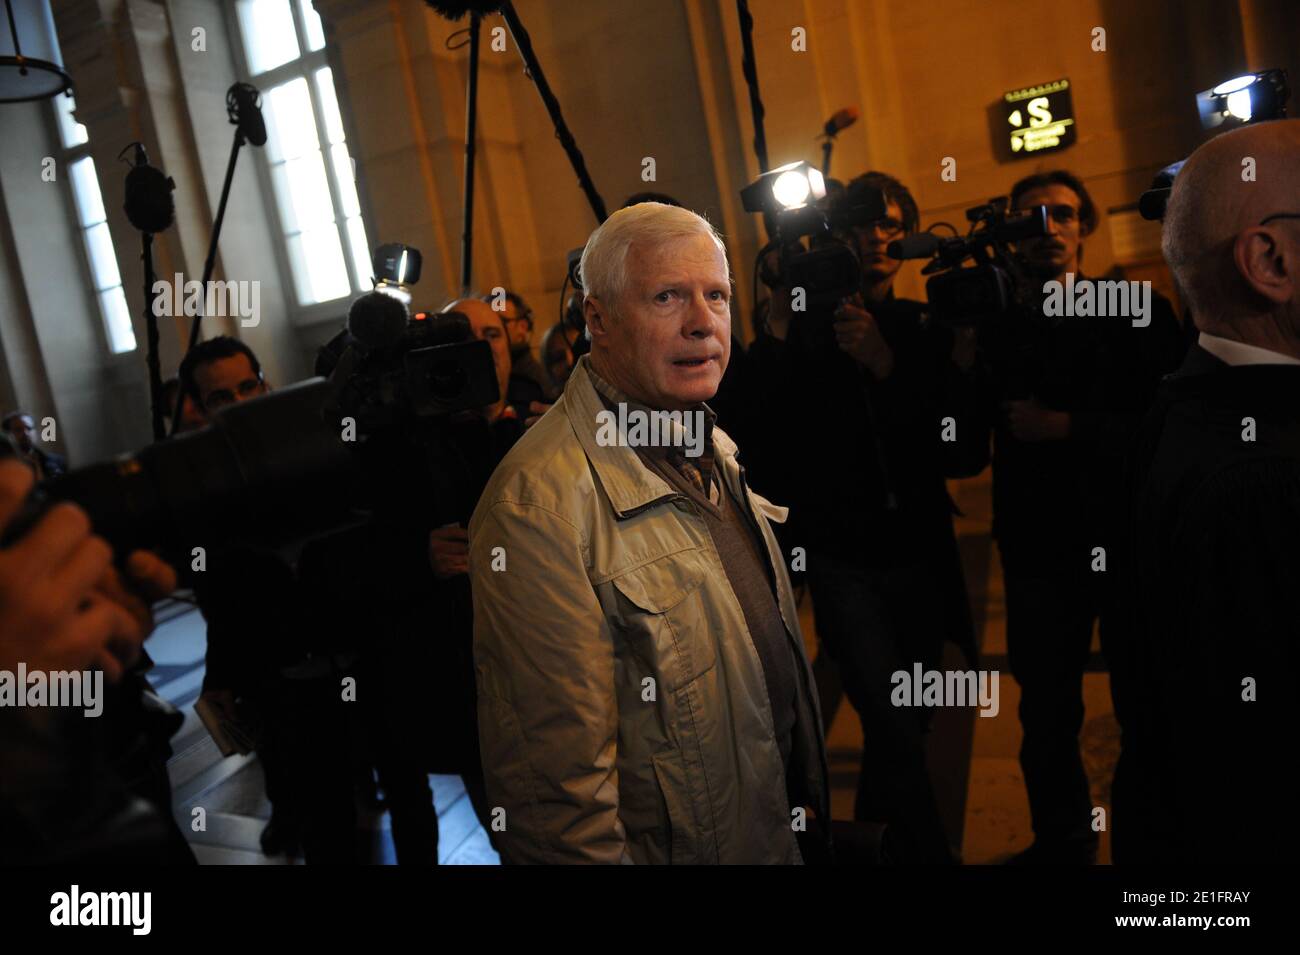 Frenchman Andre Bamberski arrives at the Palais de Justice to attend German cardiologist Dieter Krombach's trial for the murder of Kalinka Bamberski, in Paris, France on March 29, 2011. The German doctor is accused of having raped and killed his then 14-year-old stepdaughter, Kalinka Bamberski, in the summer of 1982 while she was holidaying with her mother at Krombach's home at Lake Constance, southern Germany. A court in Germany ruled that Krombach could not be held responsible for the death, but in 1995 a court in Paris found the doctor guilty of manslaughter and sentenced him in absentia to Stock Photo